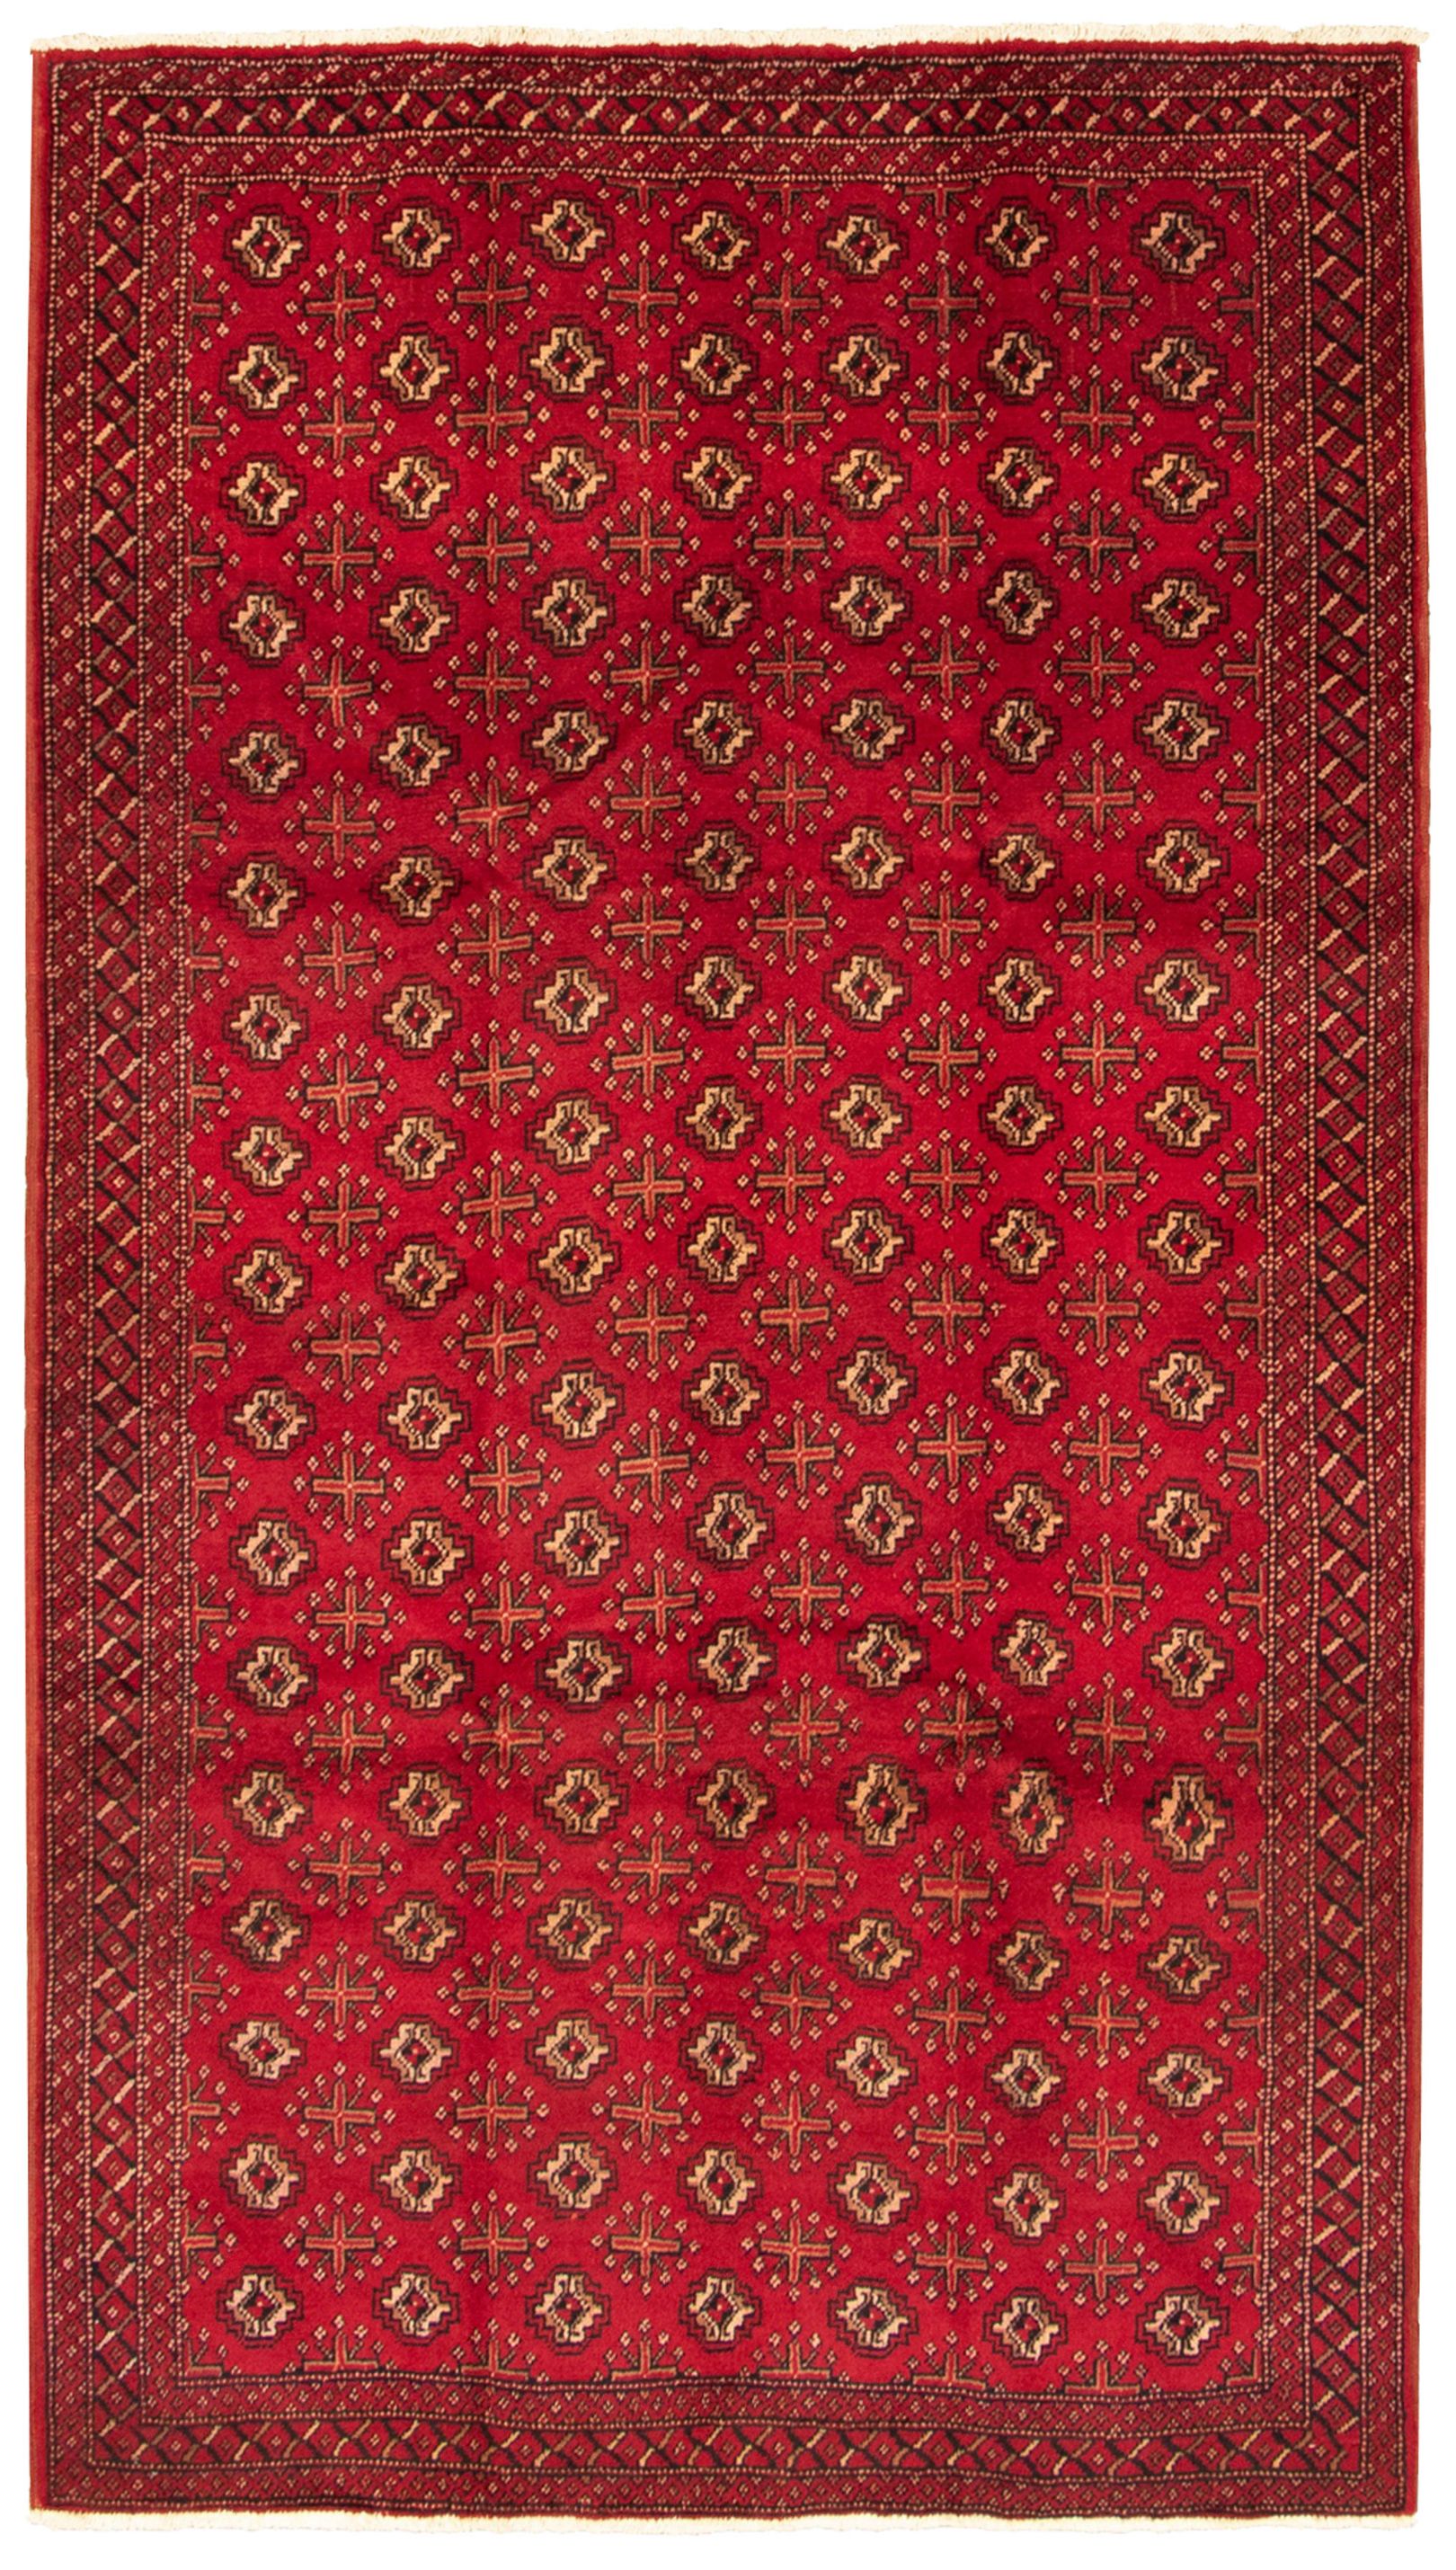 Hand-knotted Khal Mohammadi Red Wool Rug 5'1" x 9'4" Size: 5'1" x 9'4"  